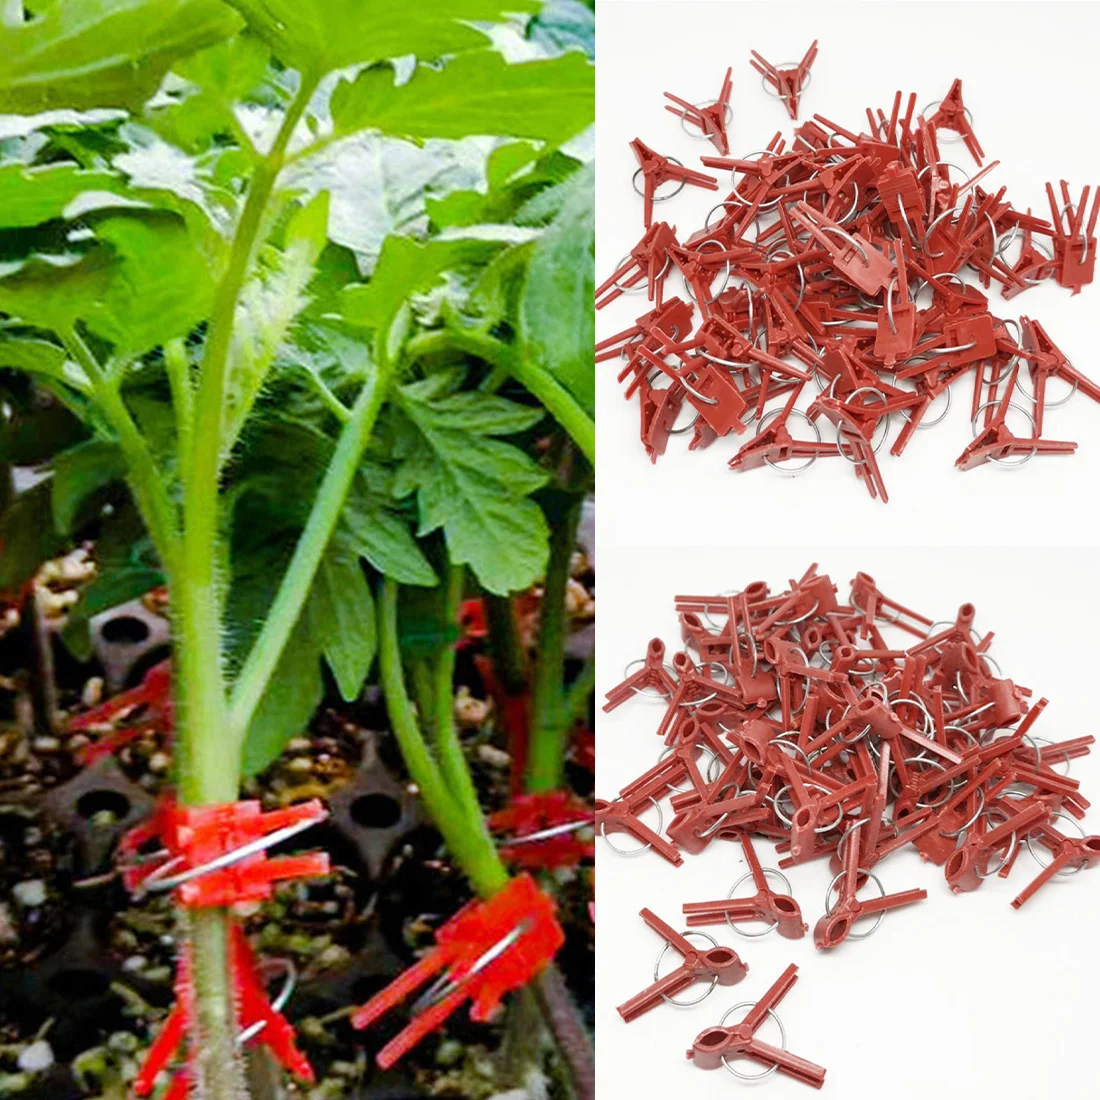 

50PCS Plastic Plant Support Clips Clamps For Plants Hanging Vine Garden Greenhouse Vegetables Tomatoes Clips Garden Graft Clip